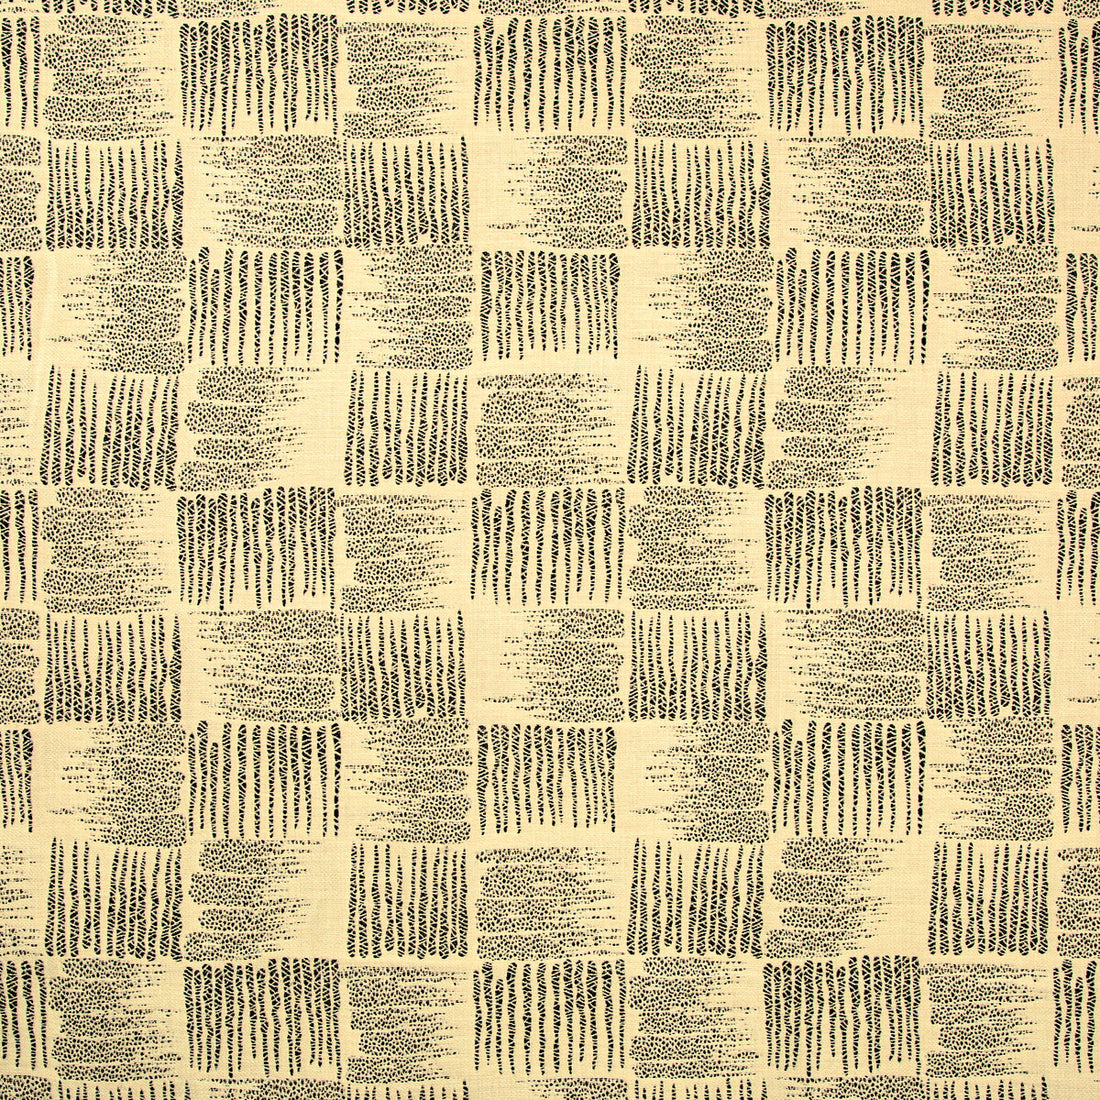 Motto fabric in tusk color - pattern 2019141.168.0 - by Lee Jofa Modern in the Kw Terra Firma III Indoor Outdoor collection